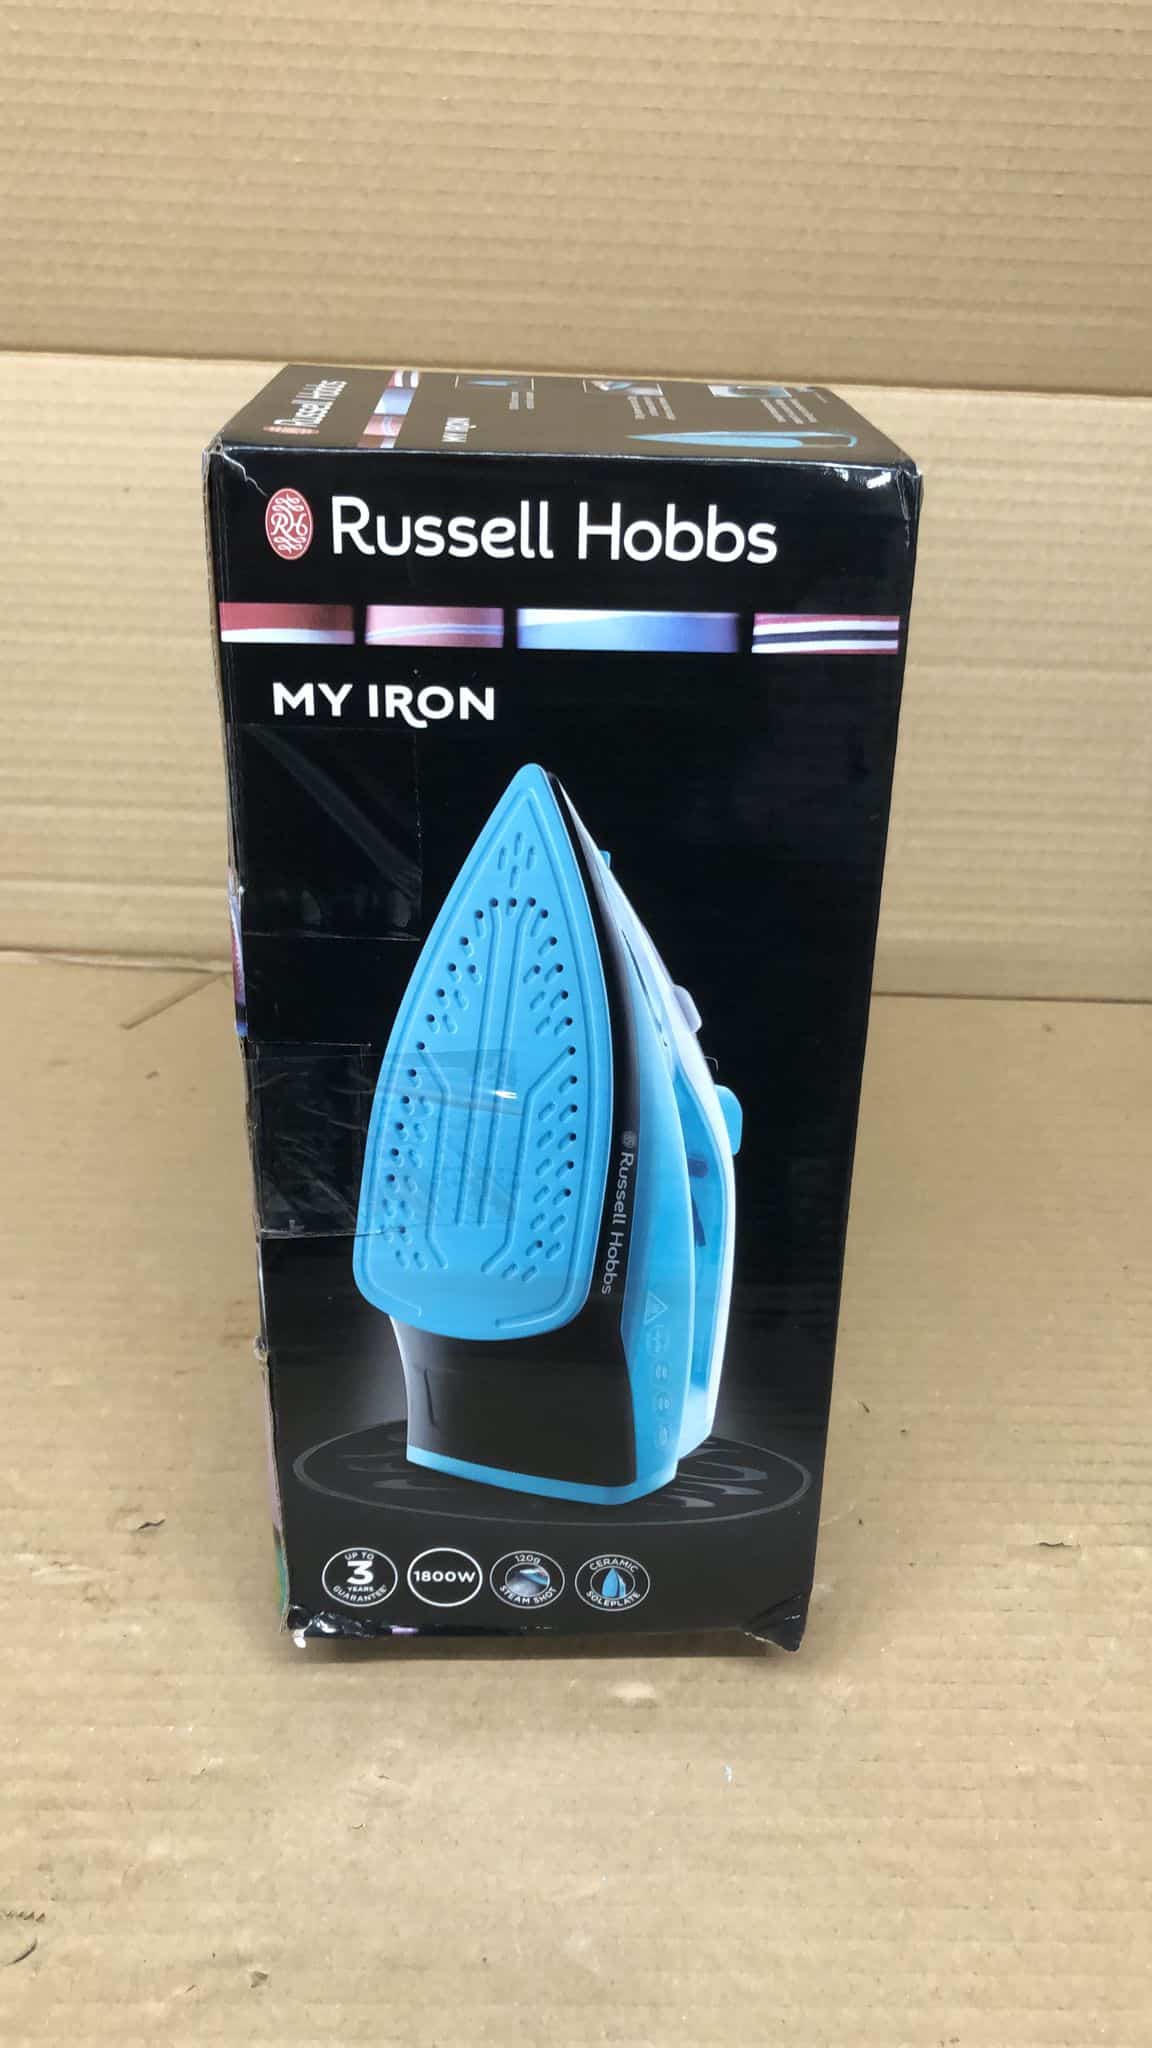 Russell Hobbs 25580 My Iron Steam Iron 1800W, 0.26L Water Tank - Blue and White-1123